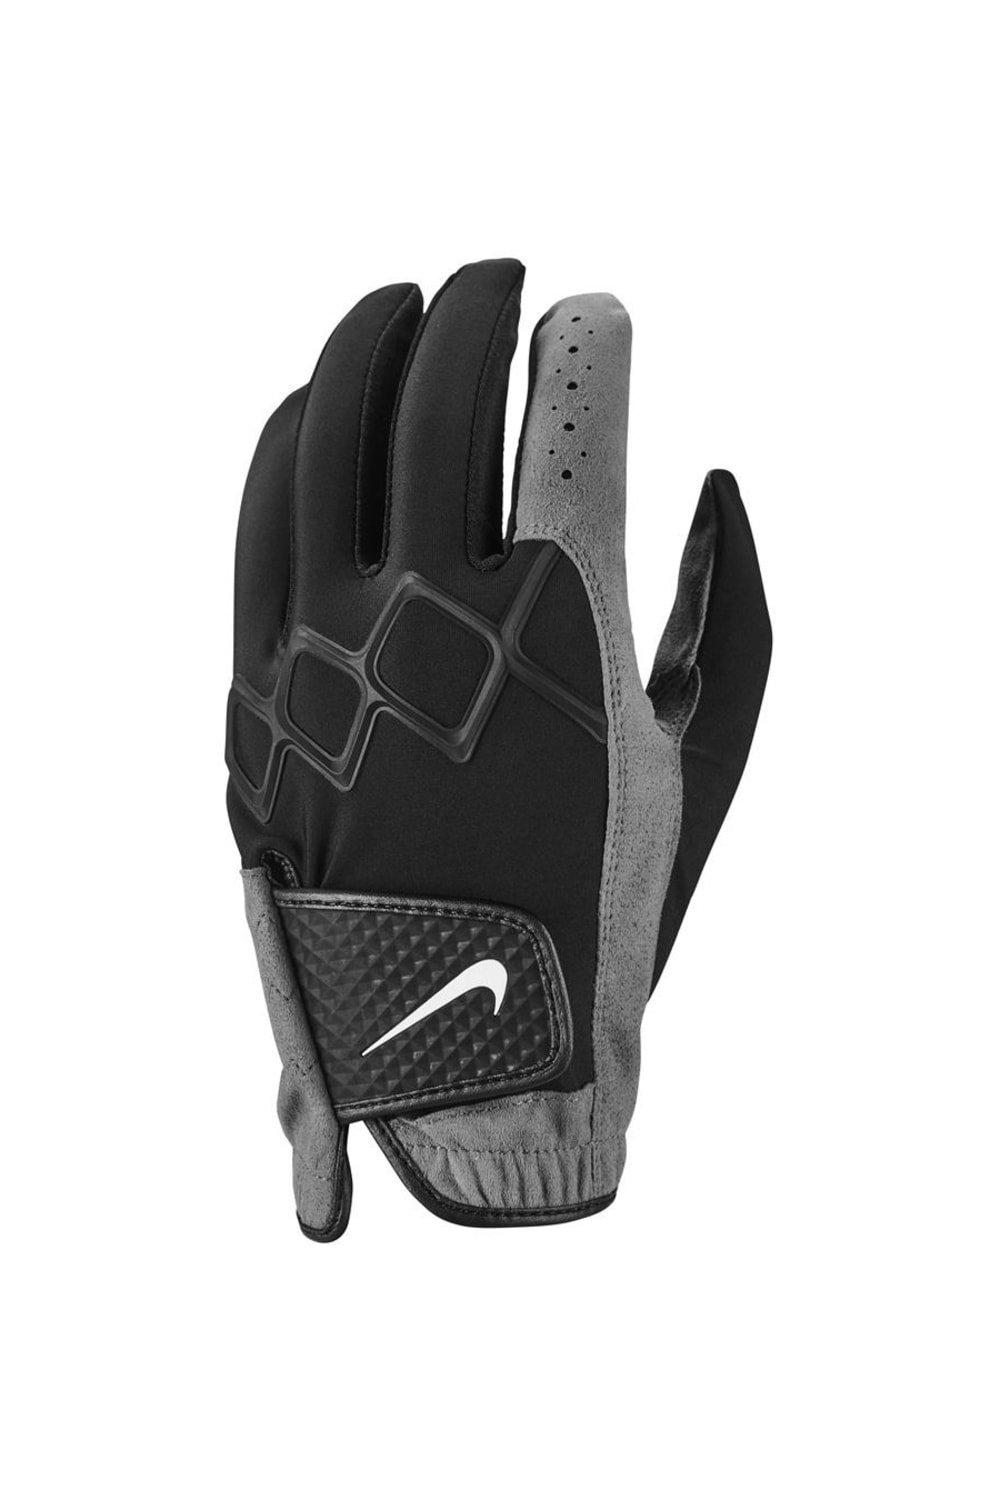 Gloves & Scarves | All Weather Golf Glove | Nike